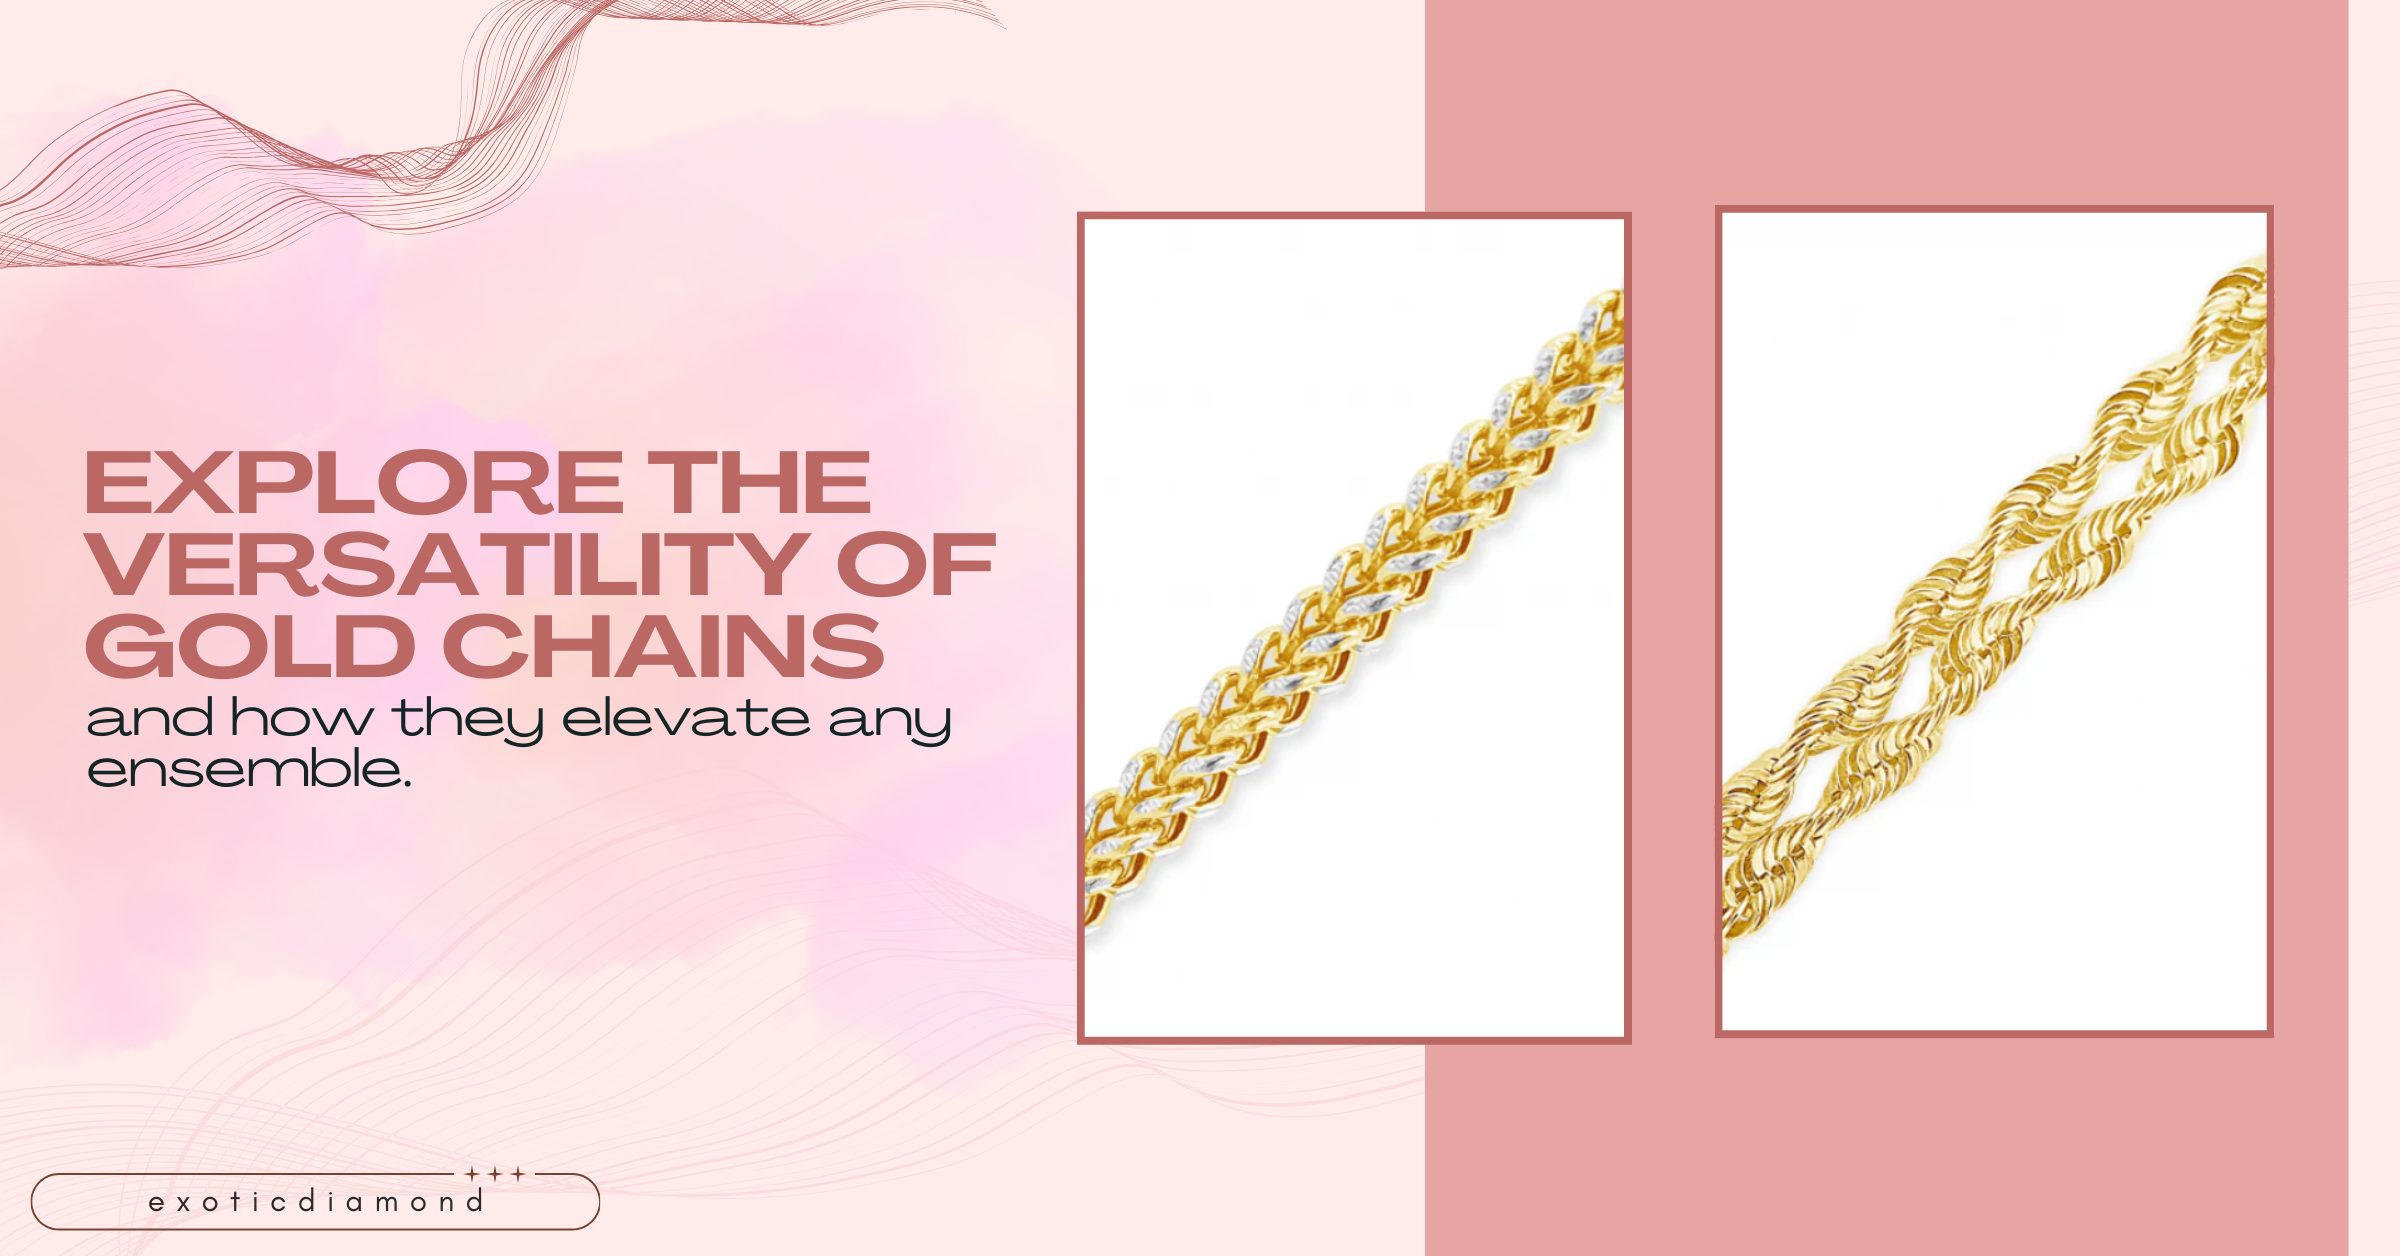 EXPLORE THE VERSATILITY OF GOLD CHAINS and how they elevate any ensemble.